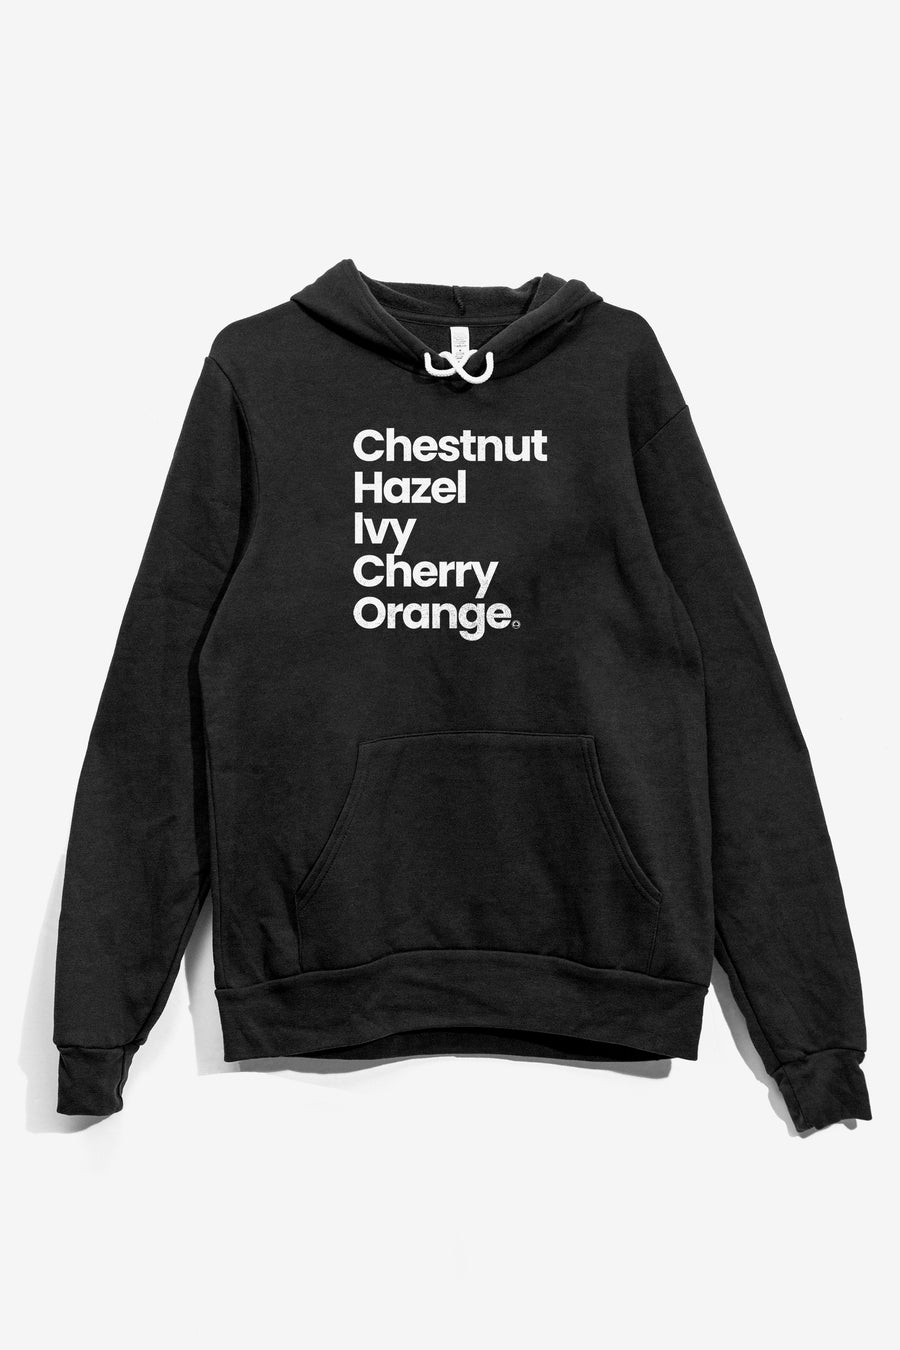 Downtown Chico Streets Hoodie